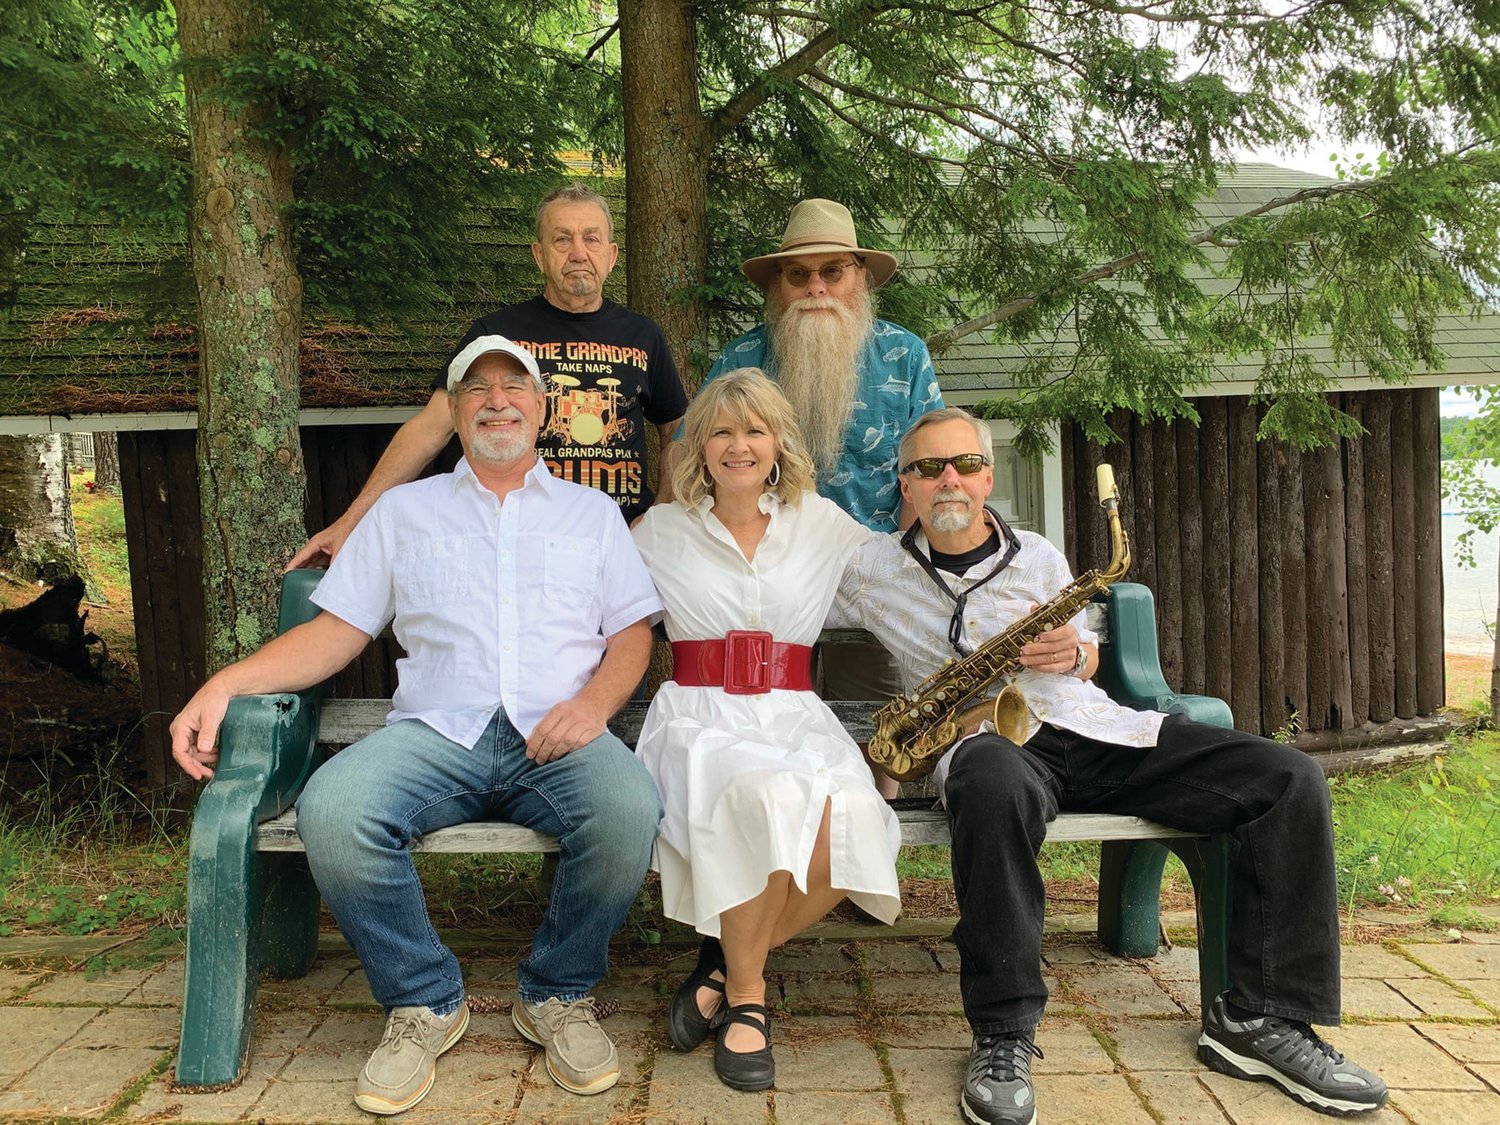 The Fabulous Mojos will provide the entertainment at MWPAI’s First Fridays Happy Hour on June 3.